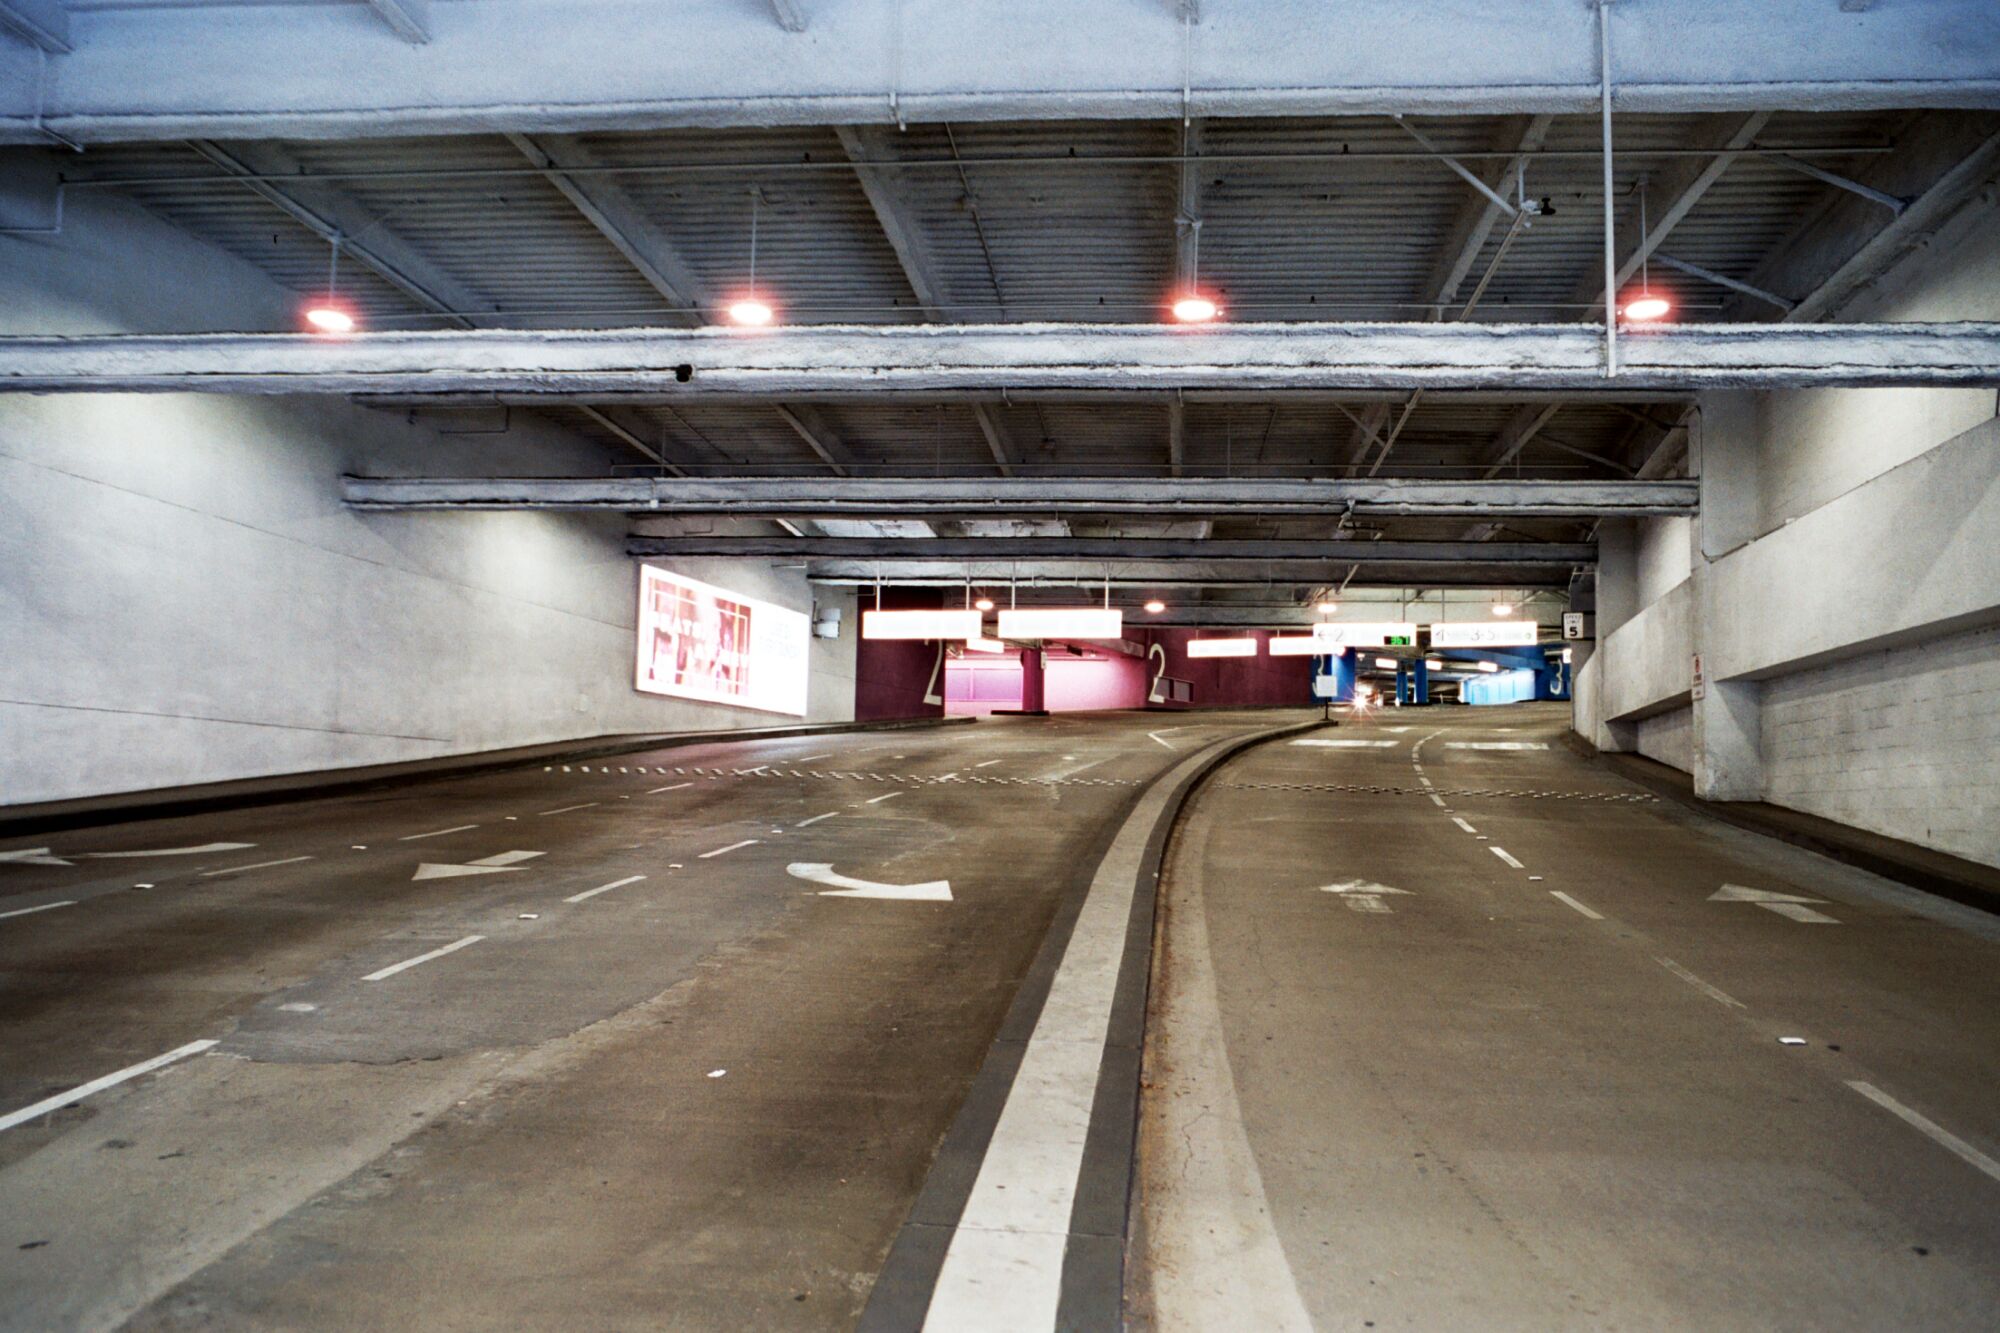 Entry and exit lanes in a large parking garage